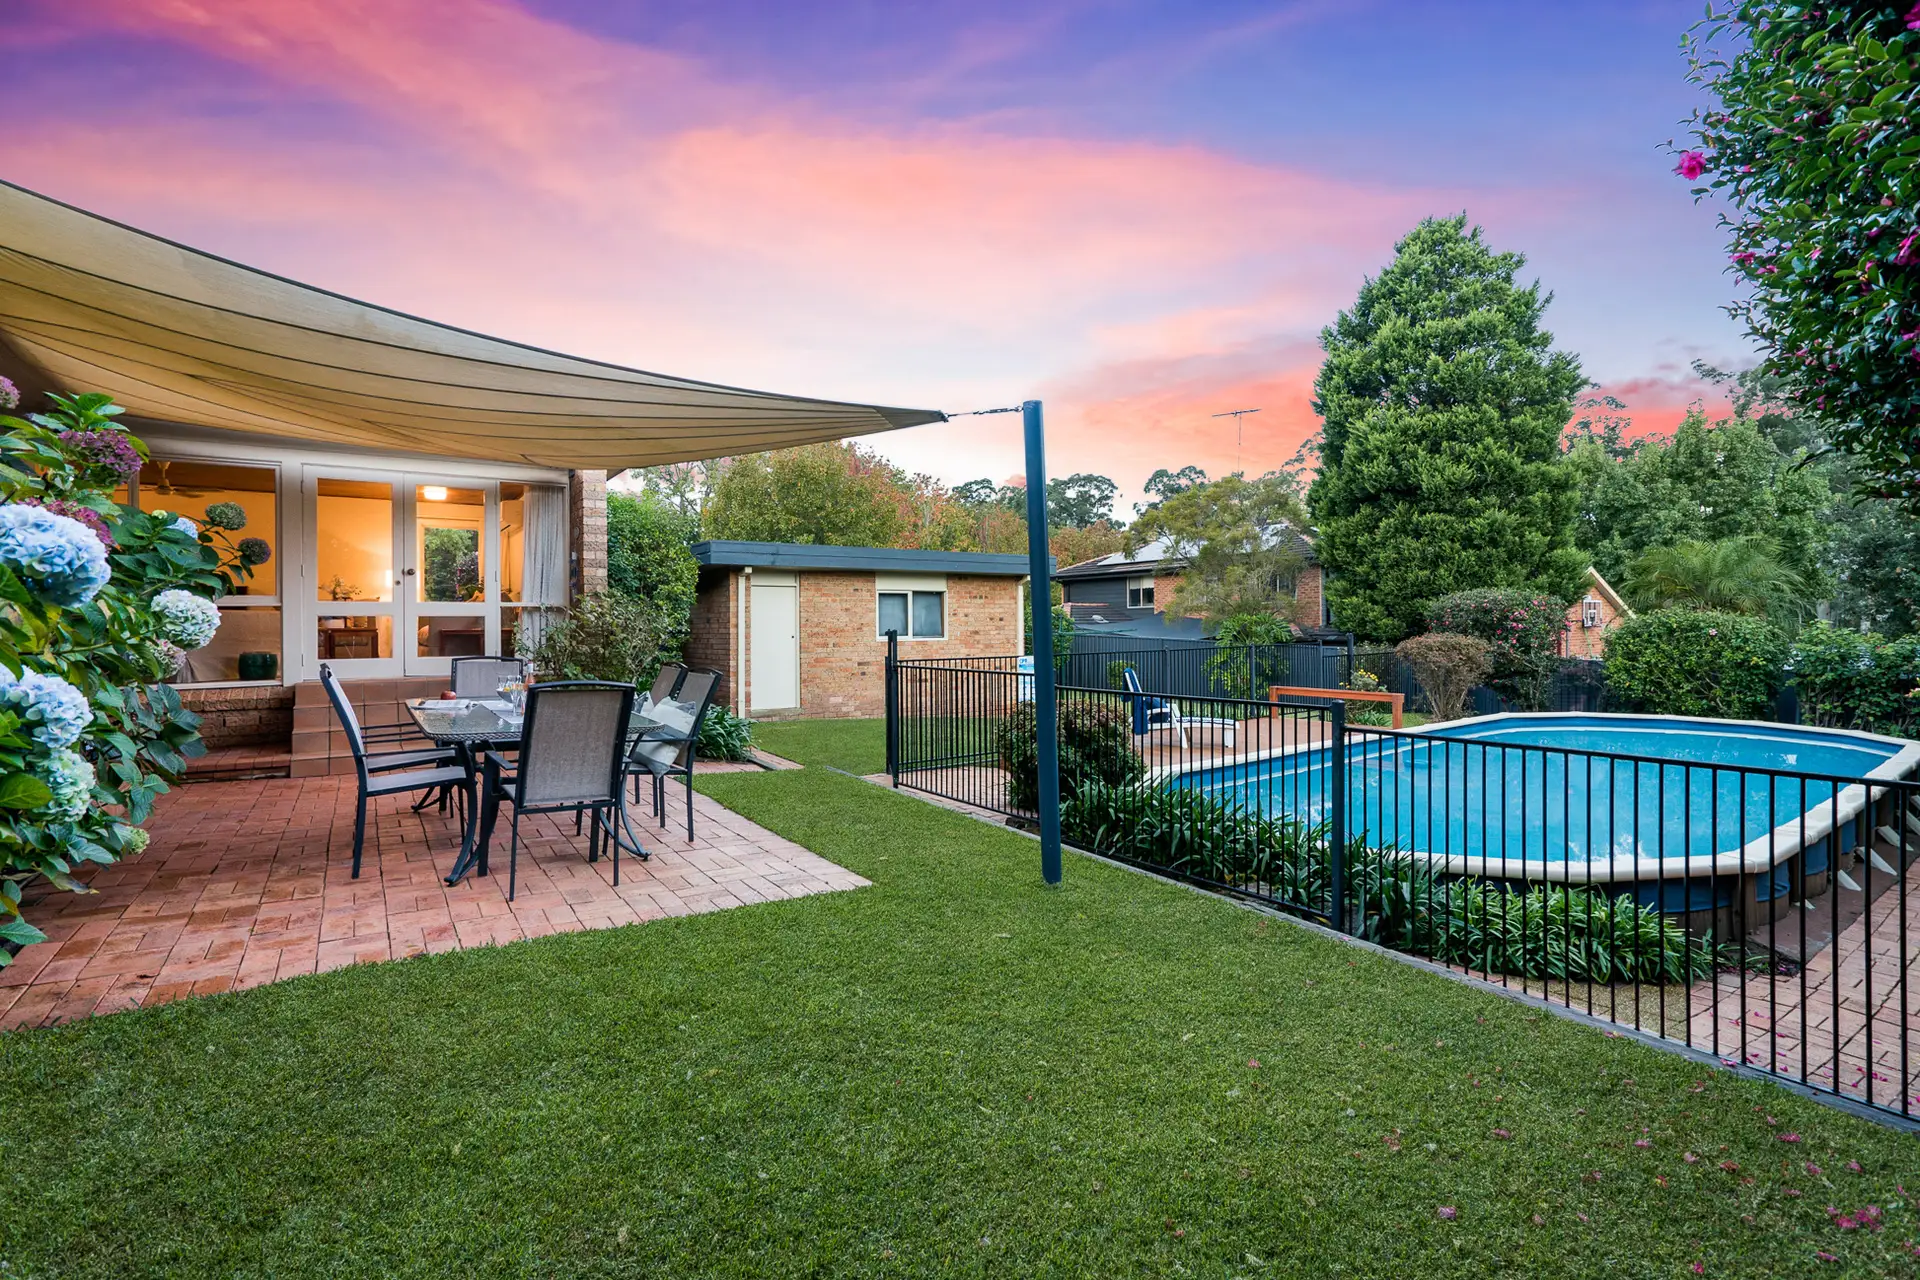 Photo #2: 6 Betts Place, West Pennant Hills - Sold by Louis Carr Real Estate